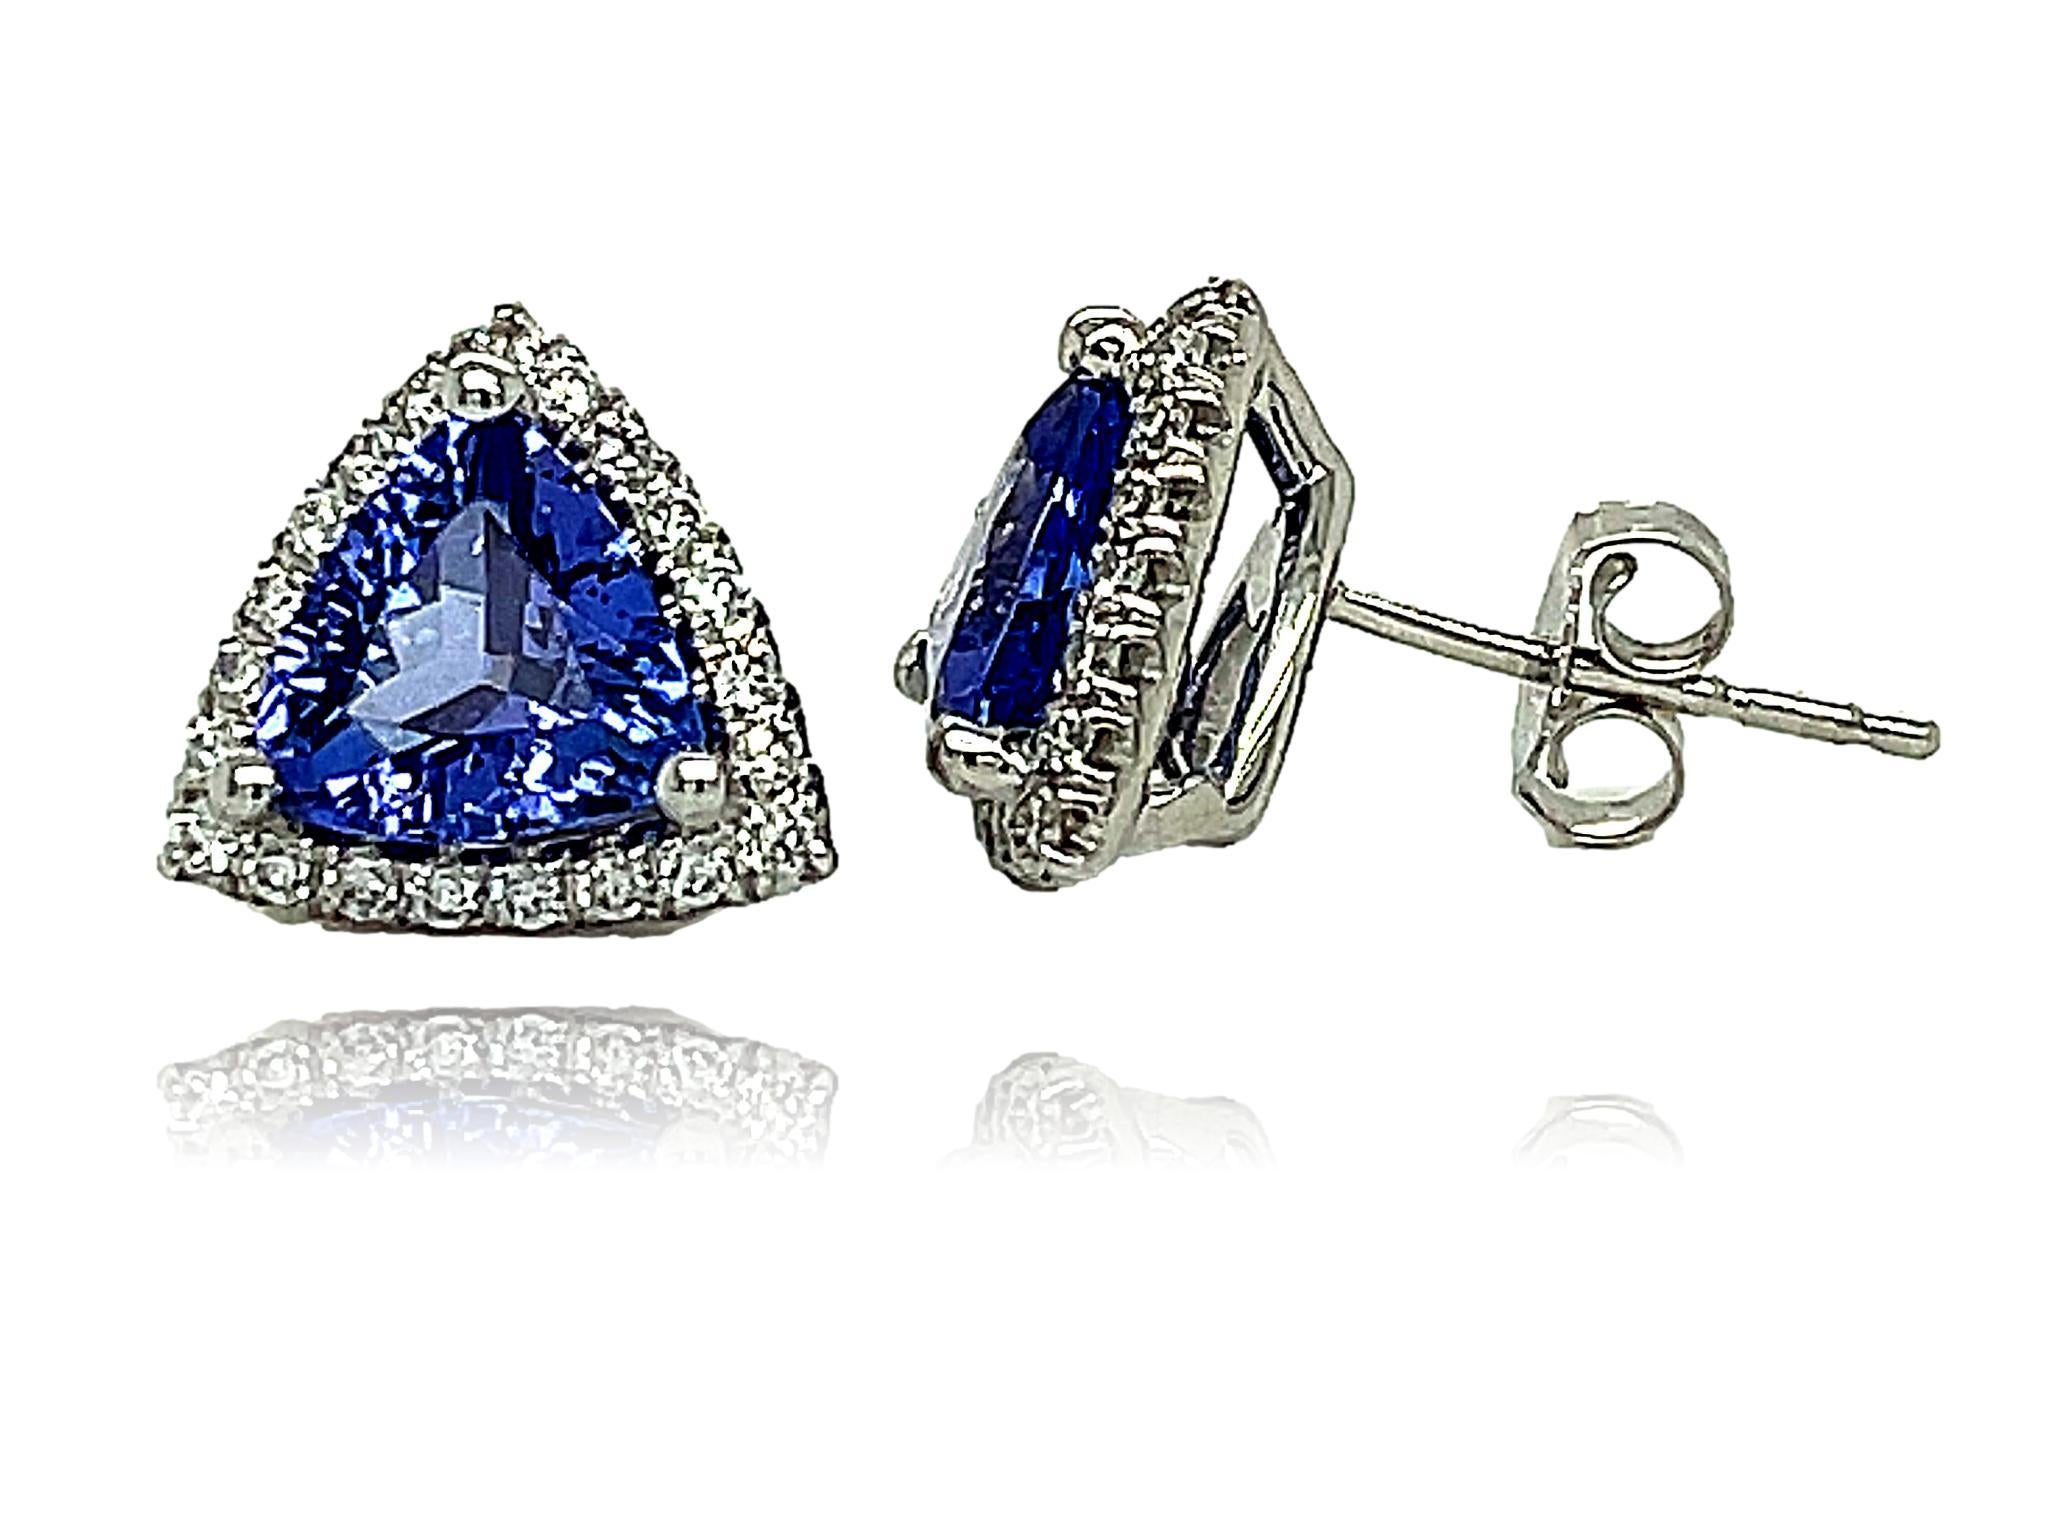 These stunning trillion AAA quality Tanzanite stud earrings are surrounded by shimmering diamonds. There is a double push lock for extra security. These earrings come in a beautiful box ready for the perfect gift!

14KW:            2.30 gms
Tanz